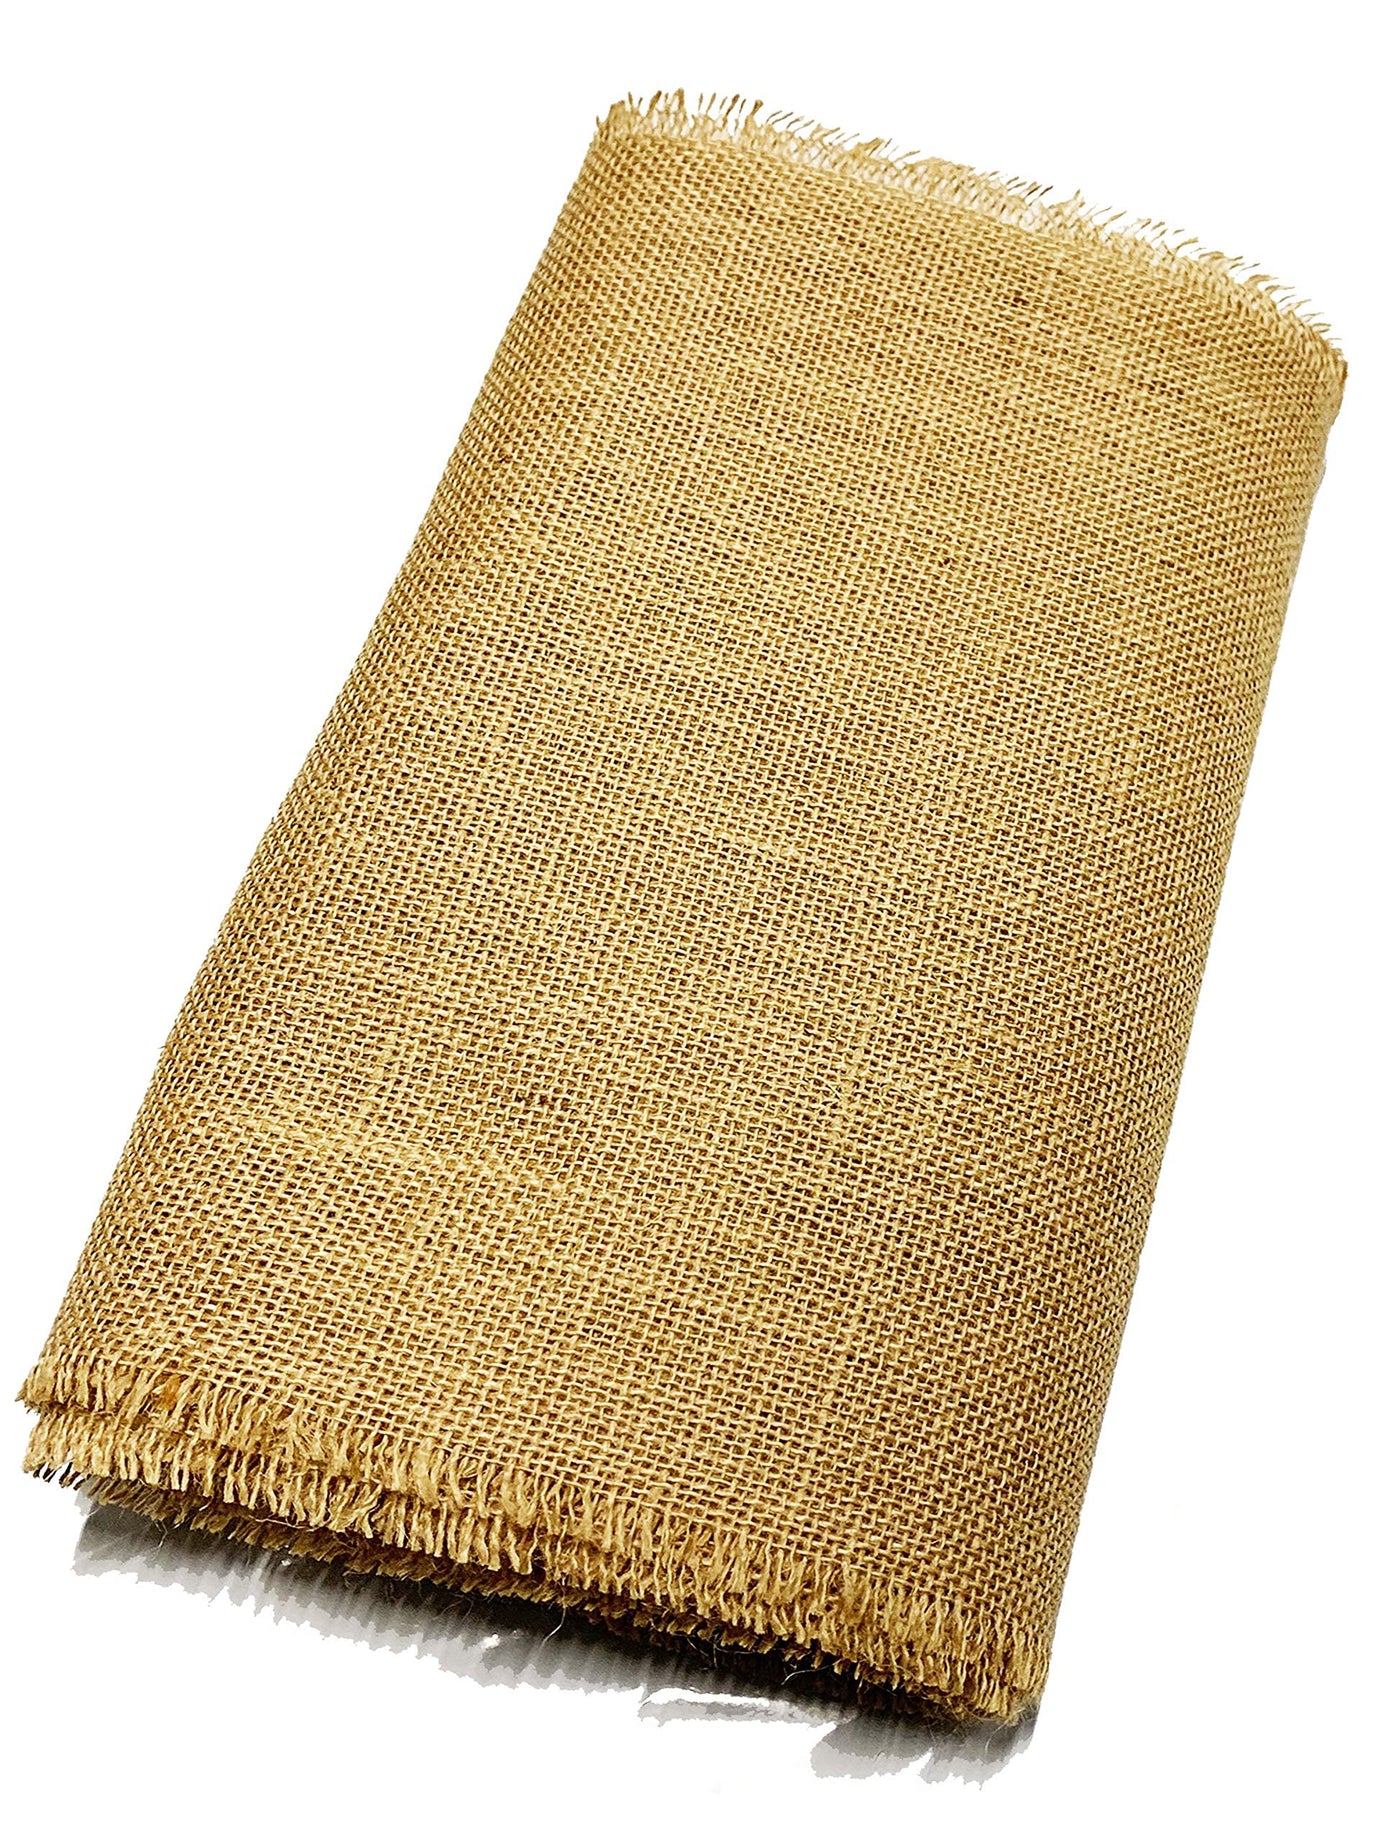 AAYU Burlap Table Runner with Natural Two Real Selvedge and Two Raw Edges 16 x 74 Inches Natural Jute Fabric Sheet for Home Party Event Wedding Decorations